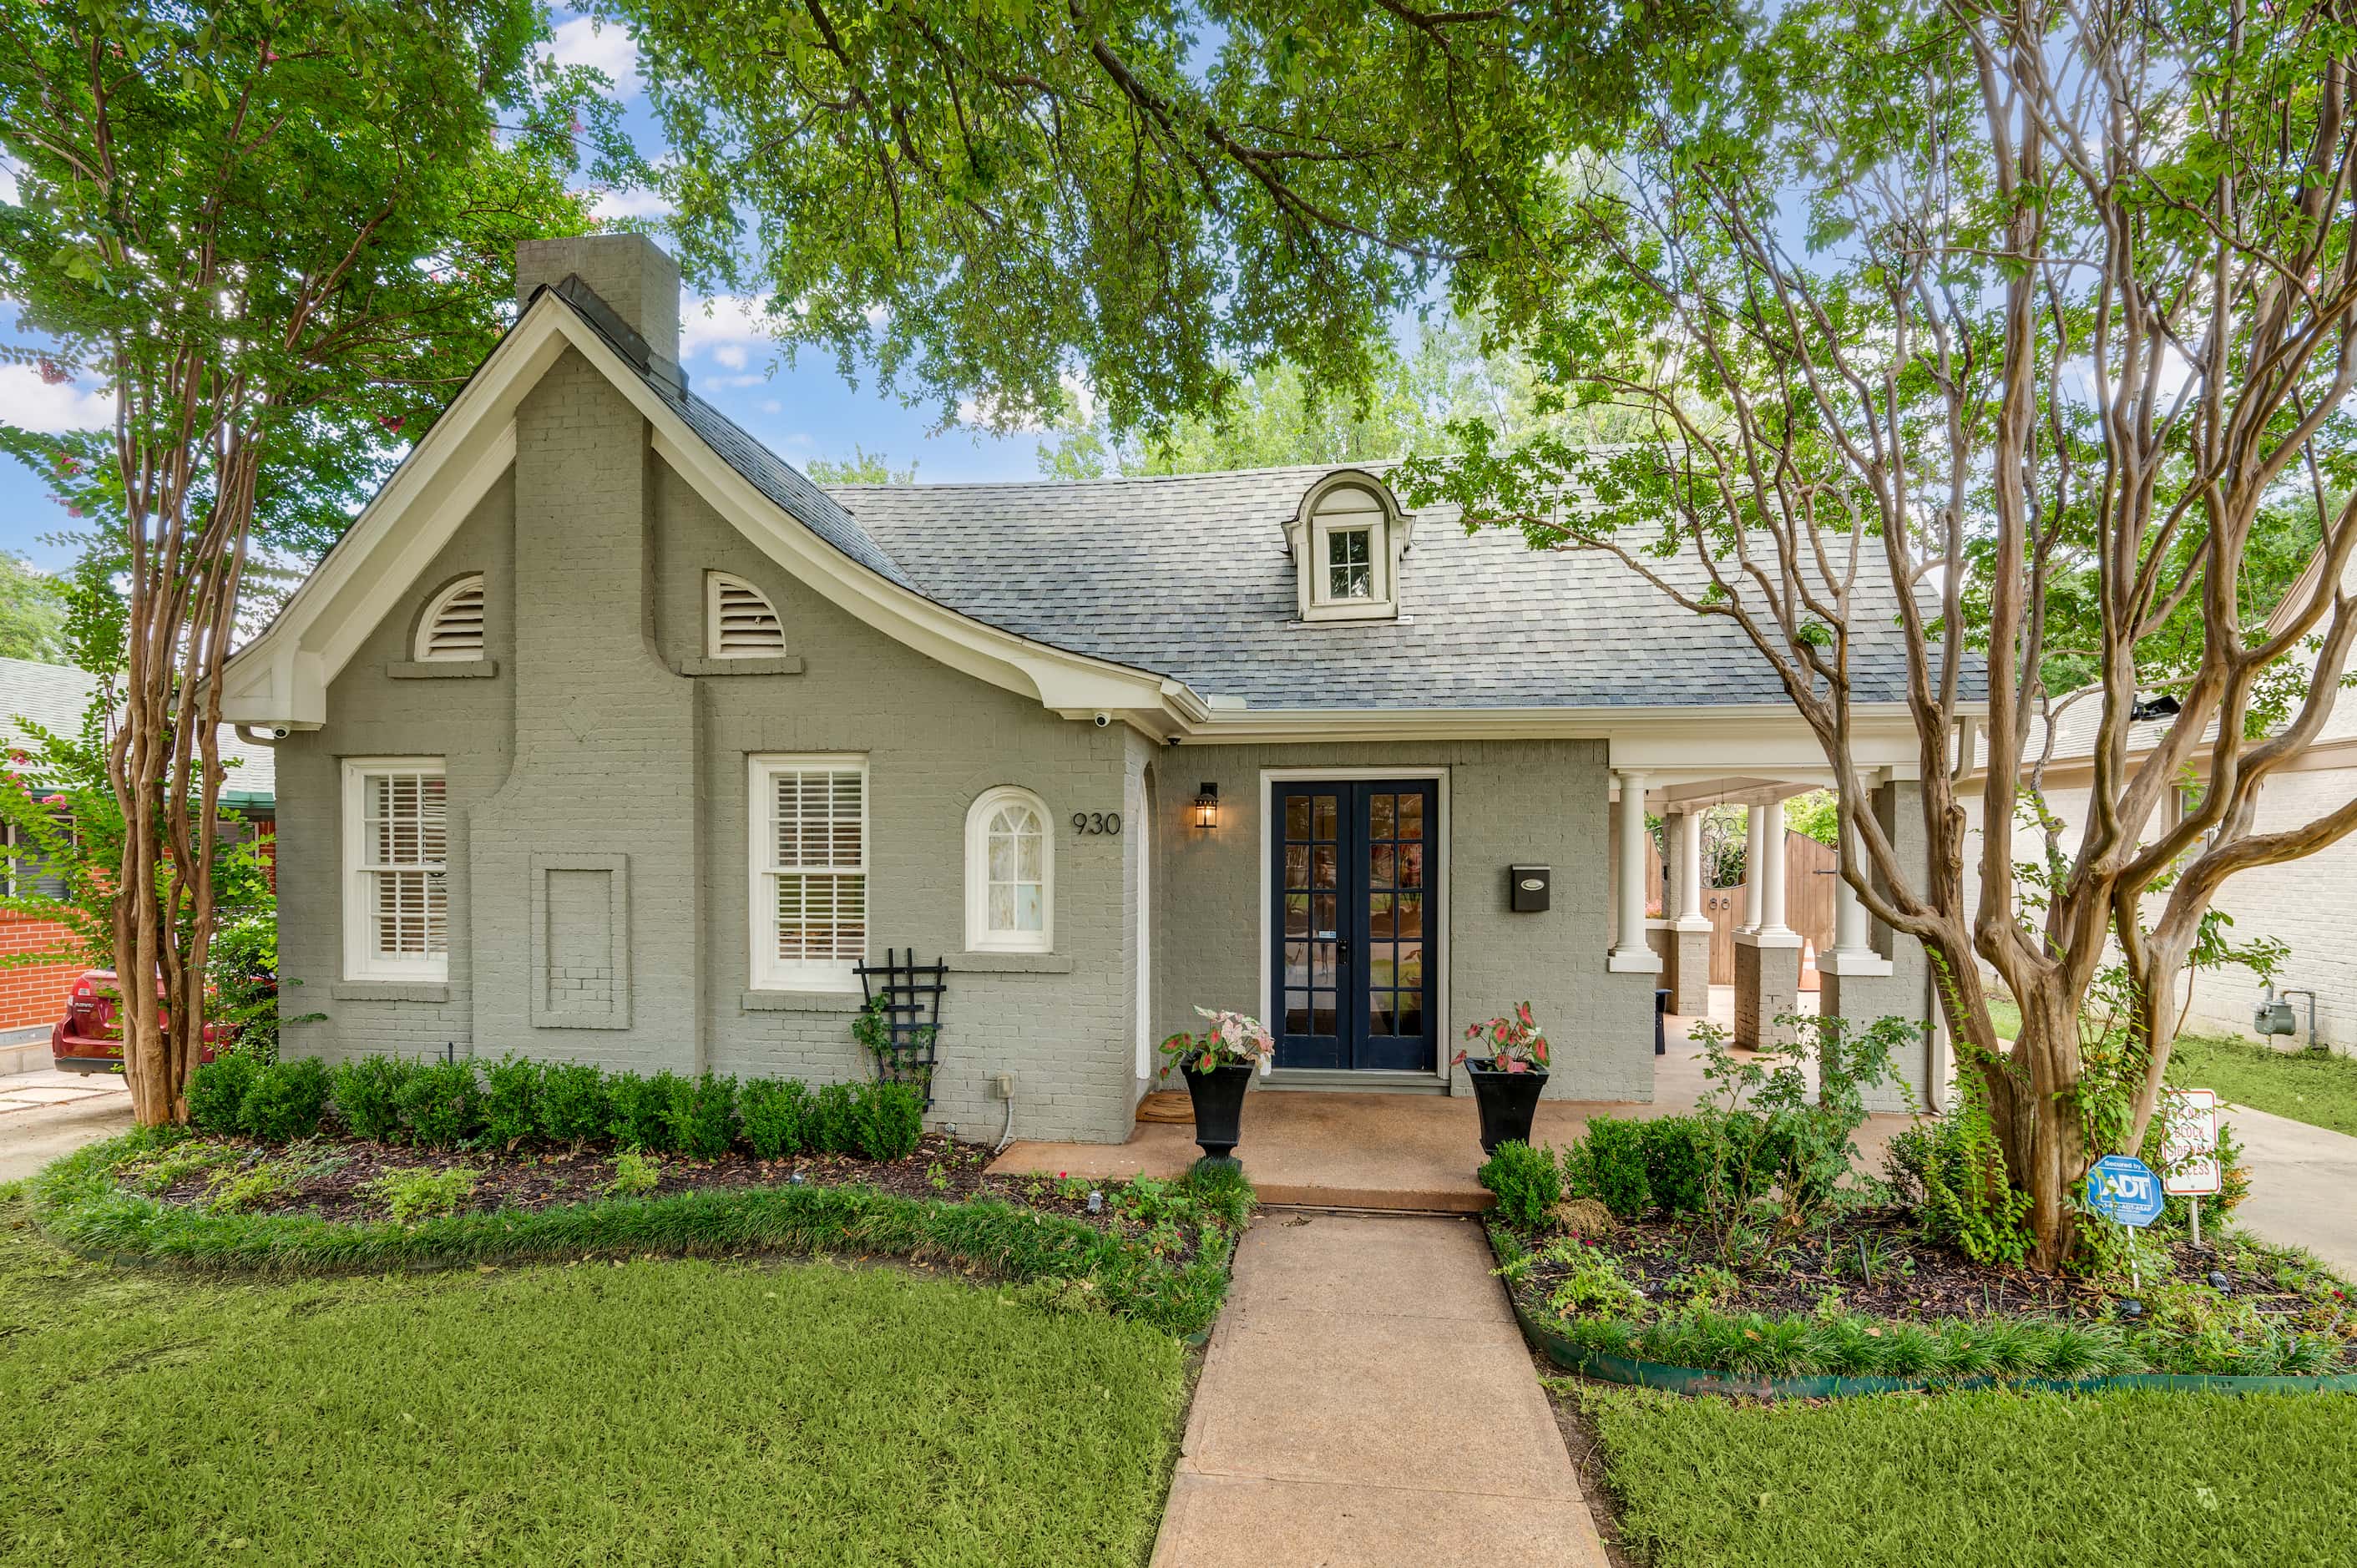 This 1925 build is located in the Kings Highway Conservation District in Oak Cliff.